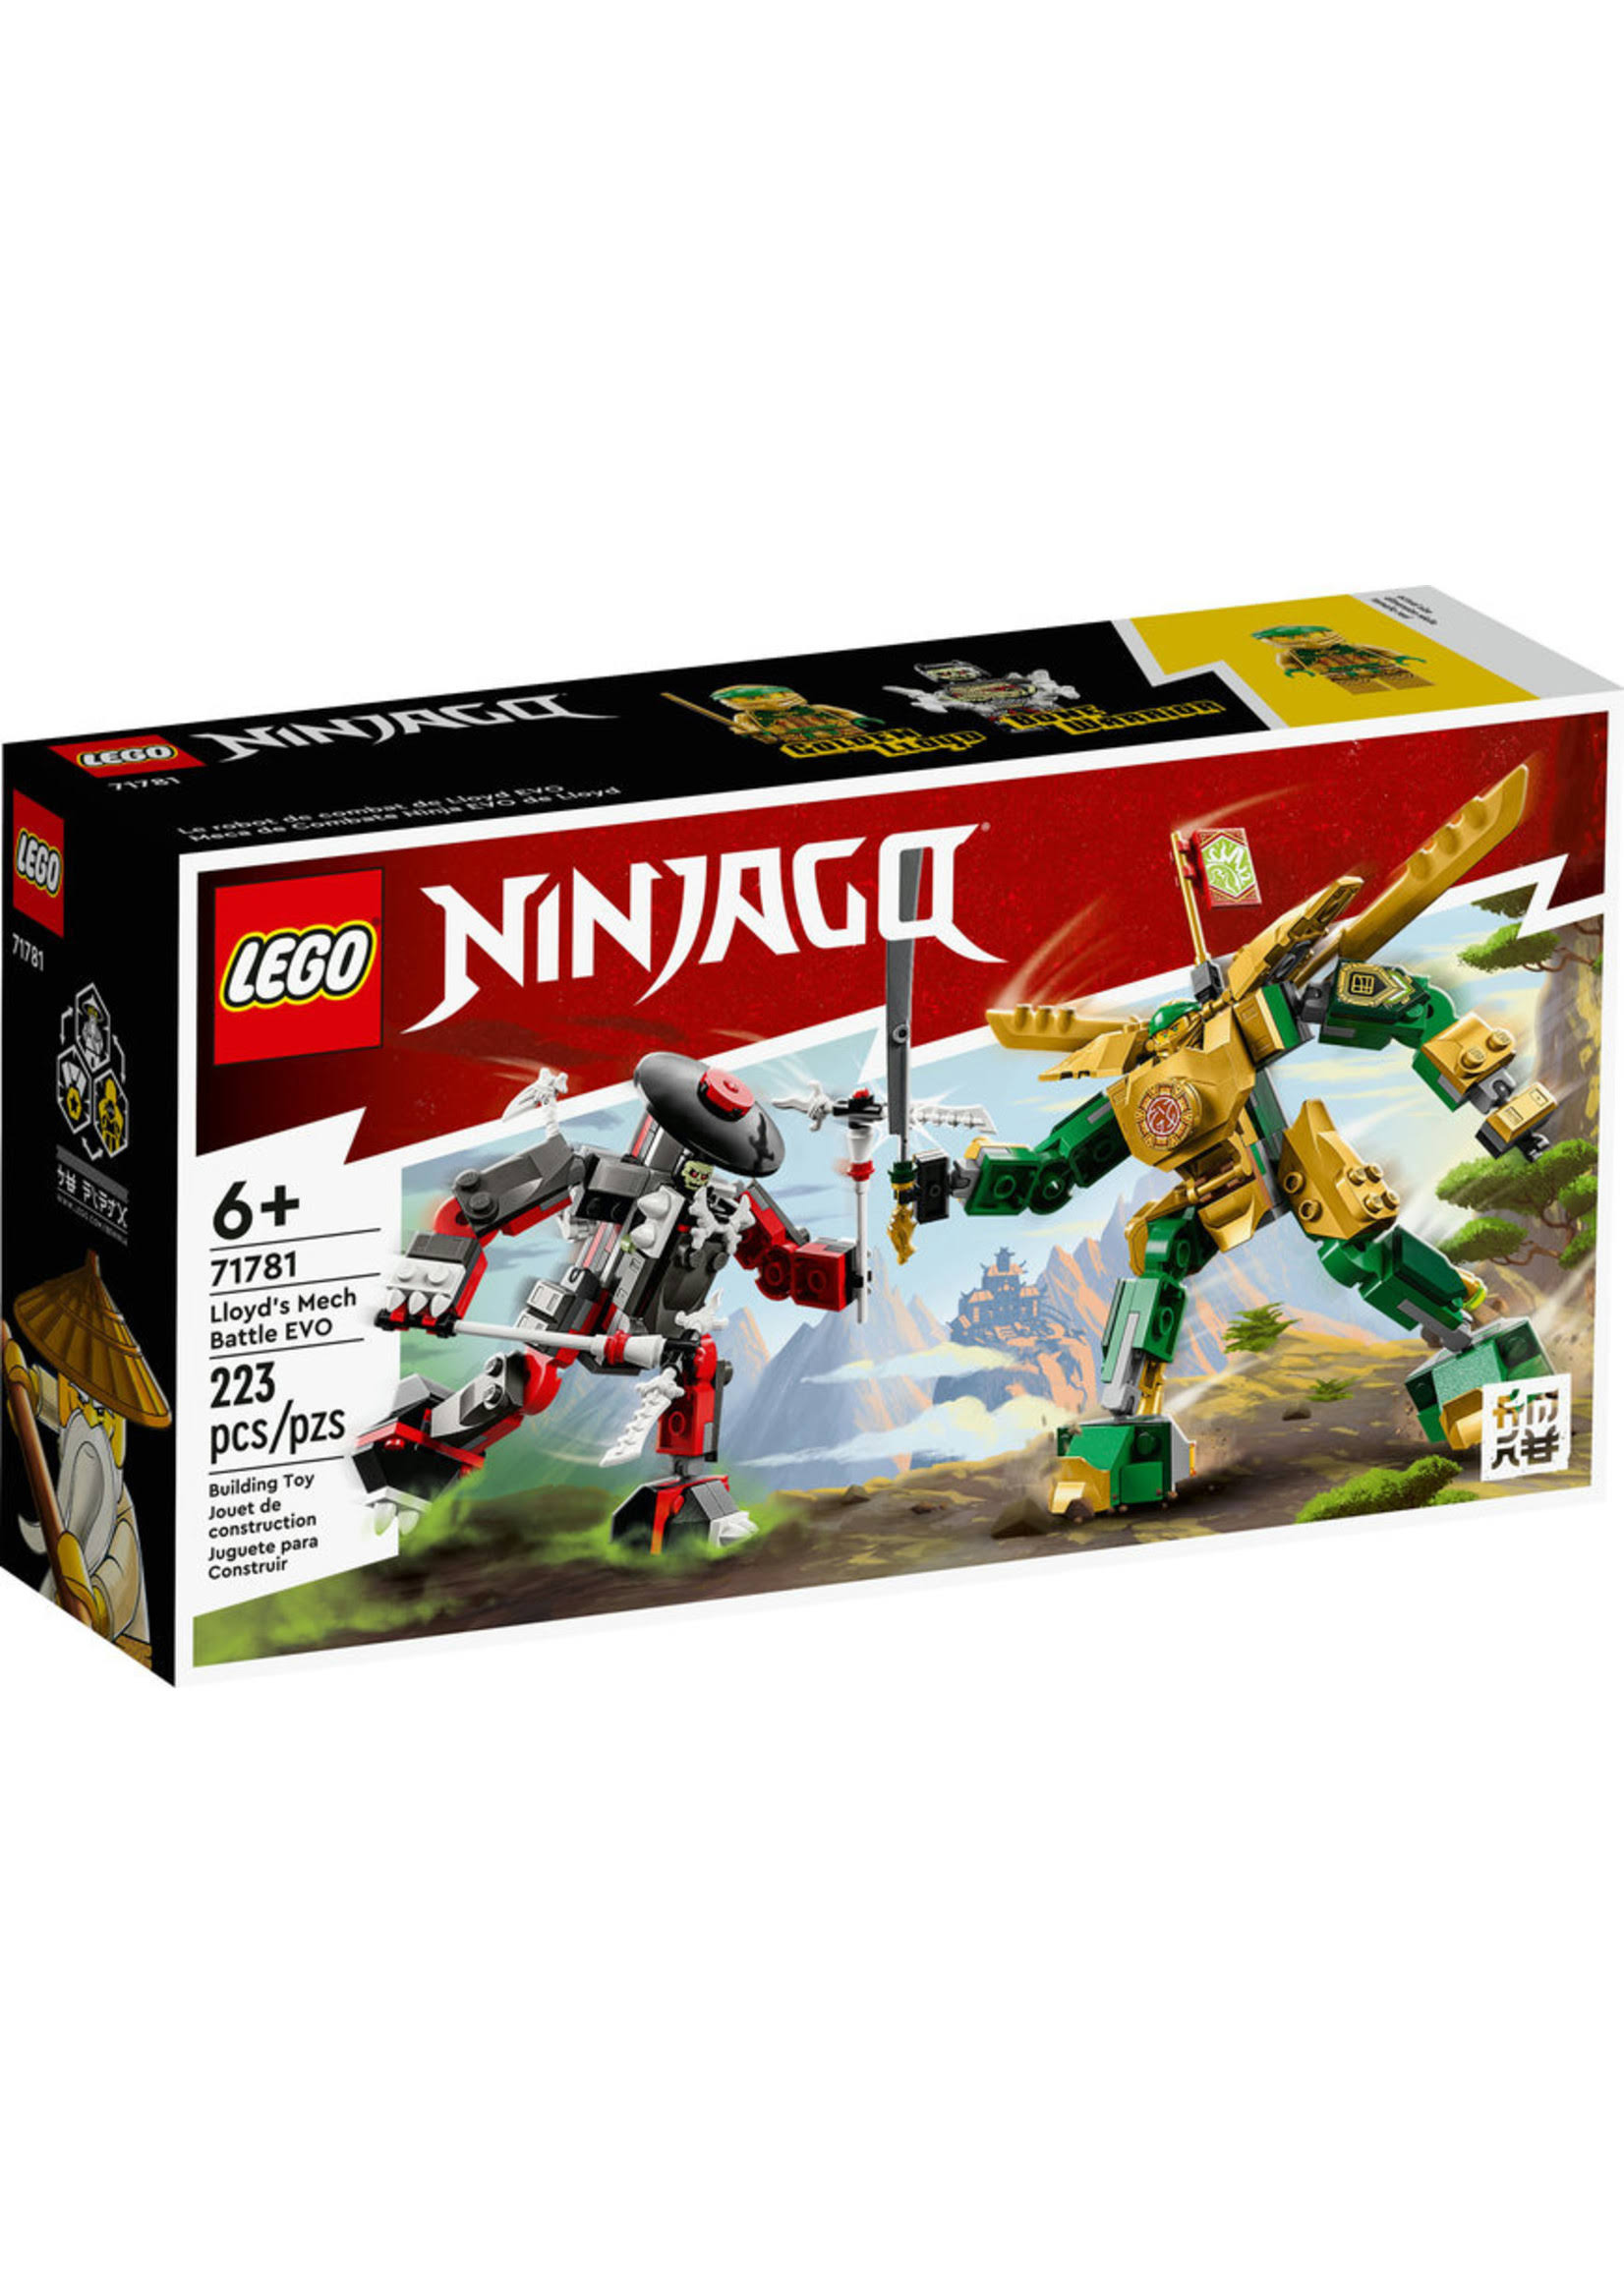 LEGO Ninjago Lloyd’s Mech Battle Evo 71781, 2 Action Figures Set with Upgradable Figure, Toy For Kids Ages 6 Plus with Bone Warrior and Golden Lloyd